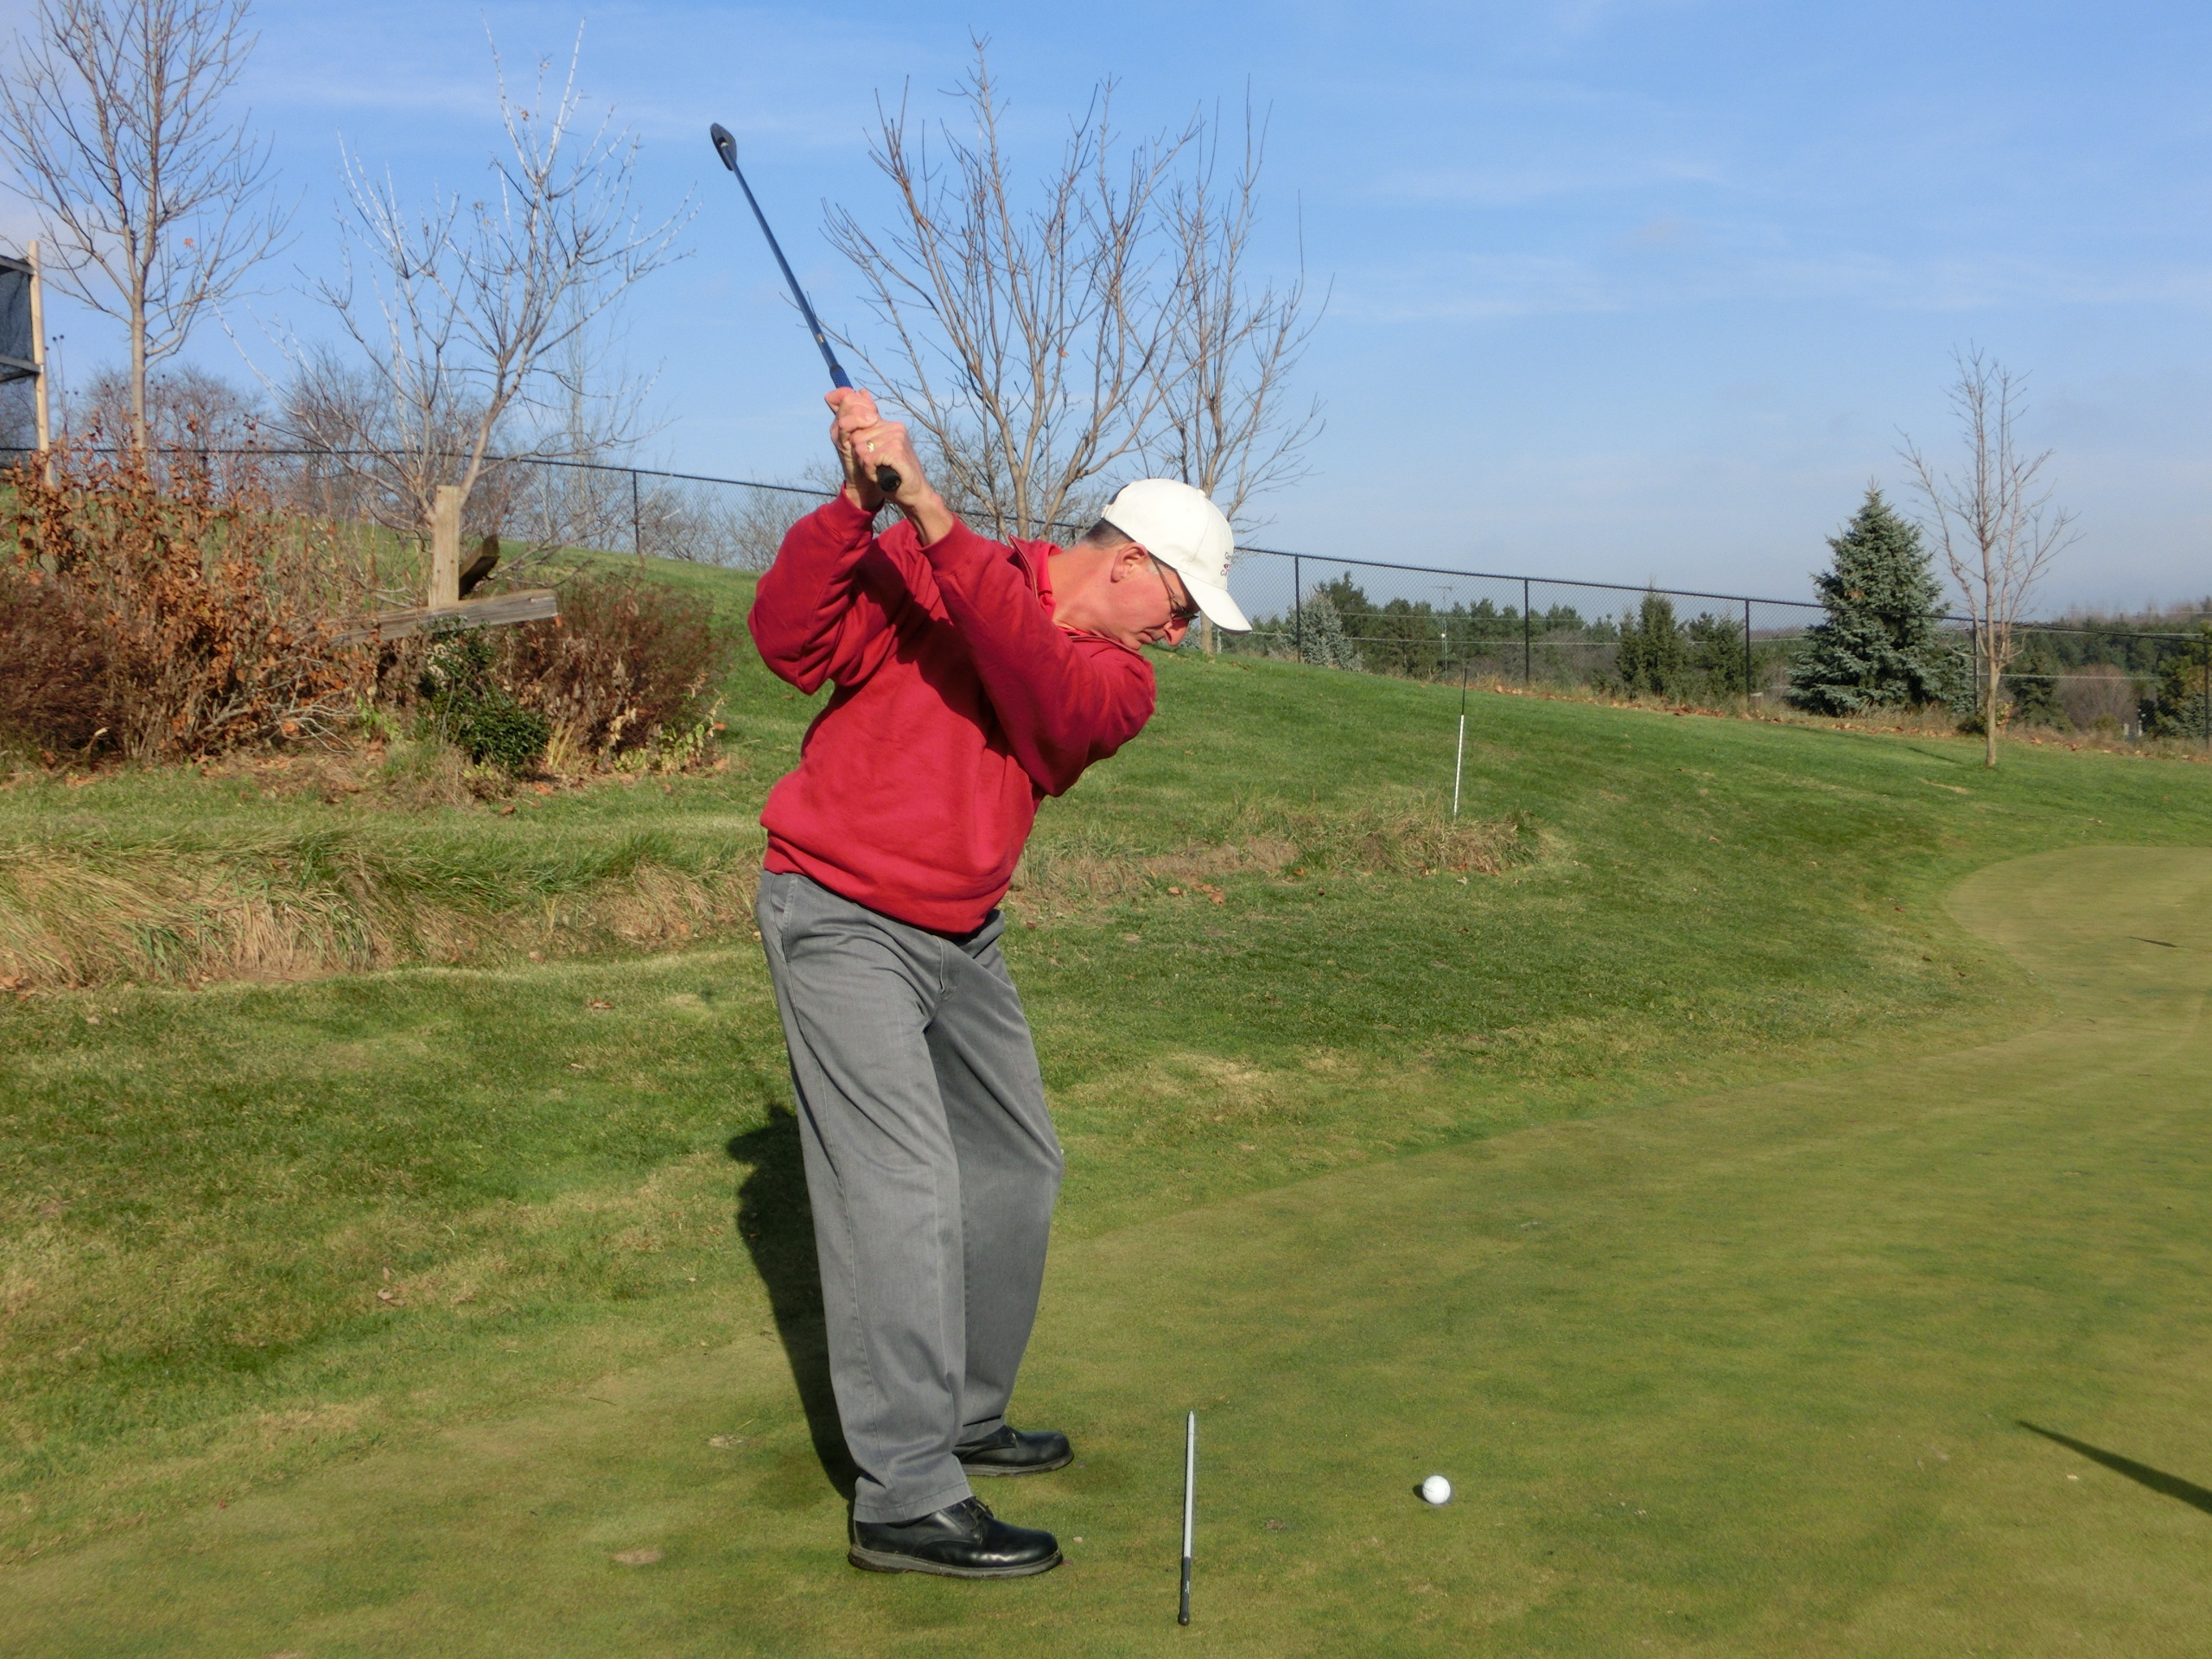 Top of the golf swing tips